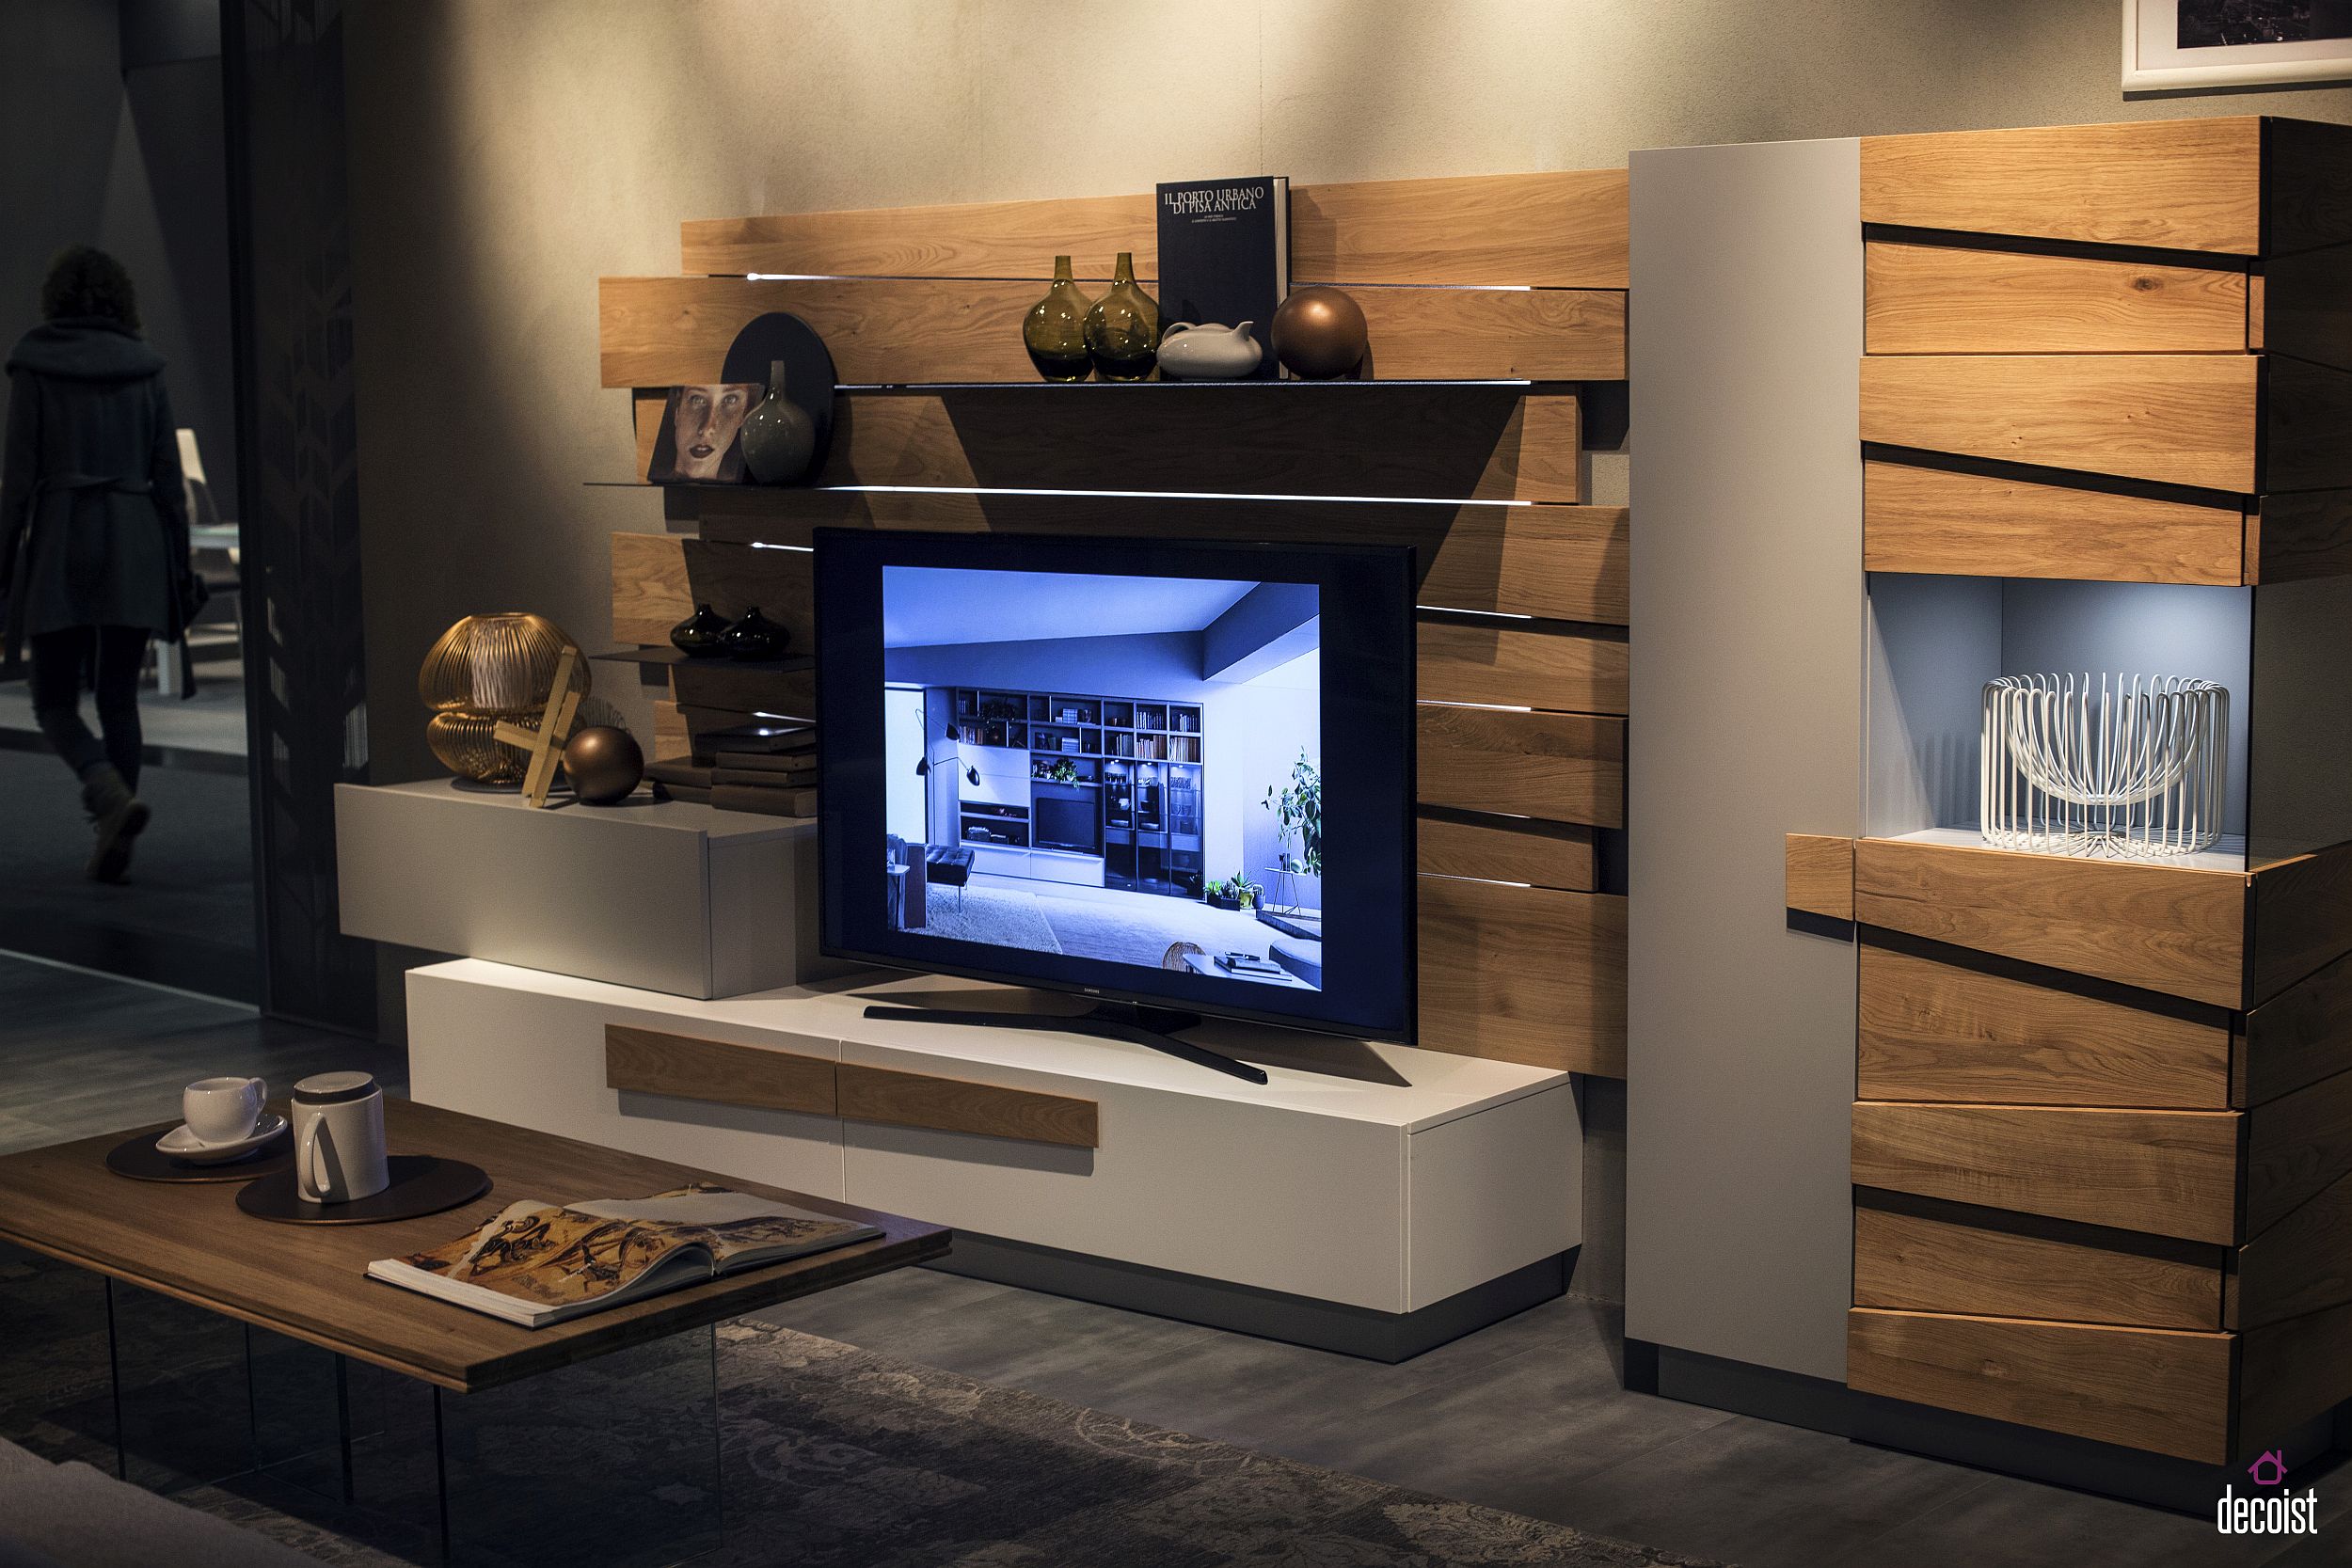 Modern Tv Room Design for Small Space